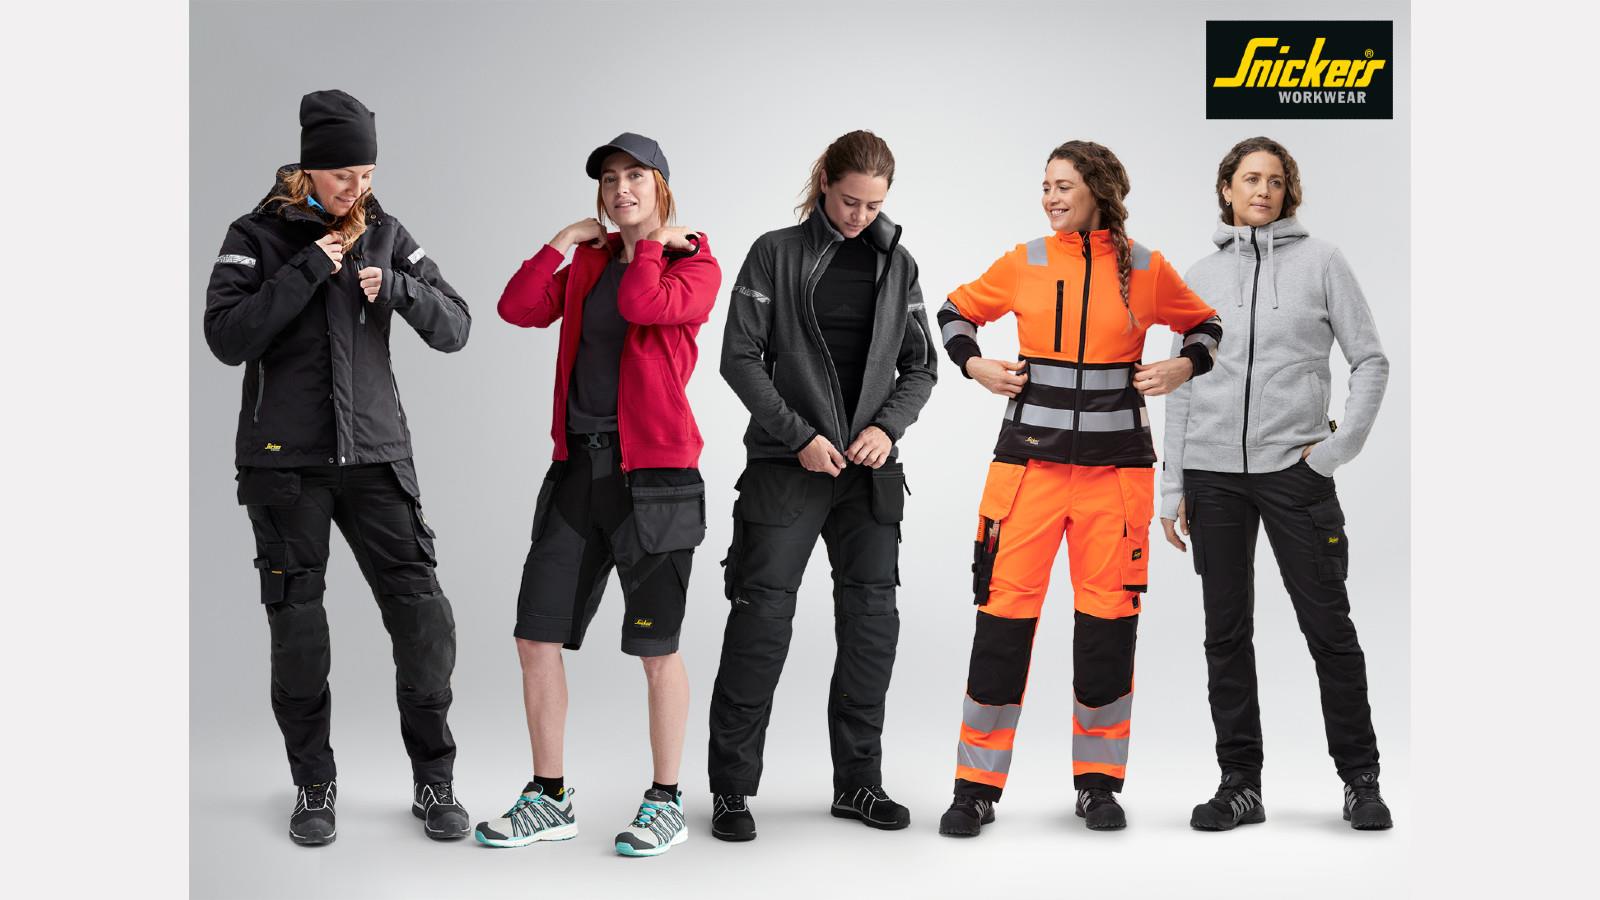 Snickers Workwear’s Street-smart, Ergonomic Working Clothes for Women image